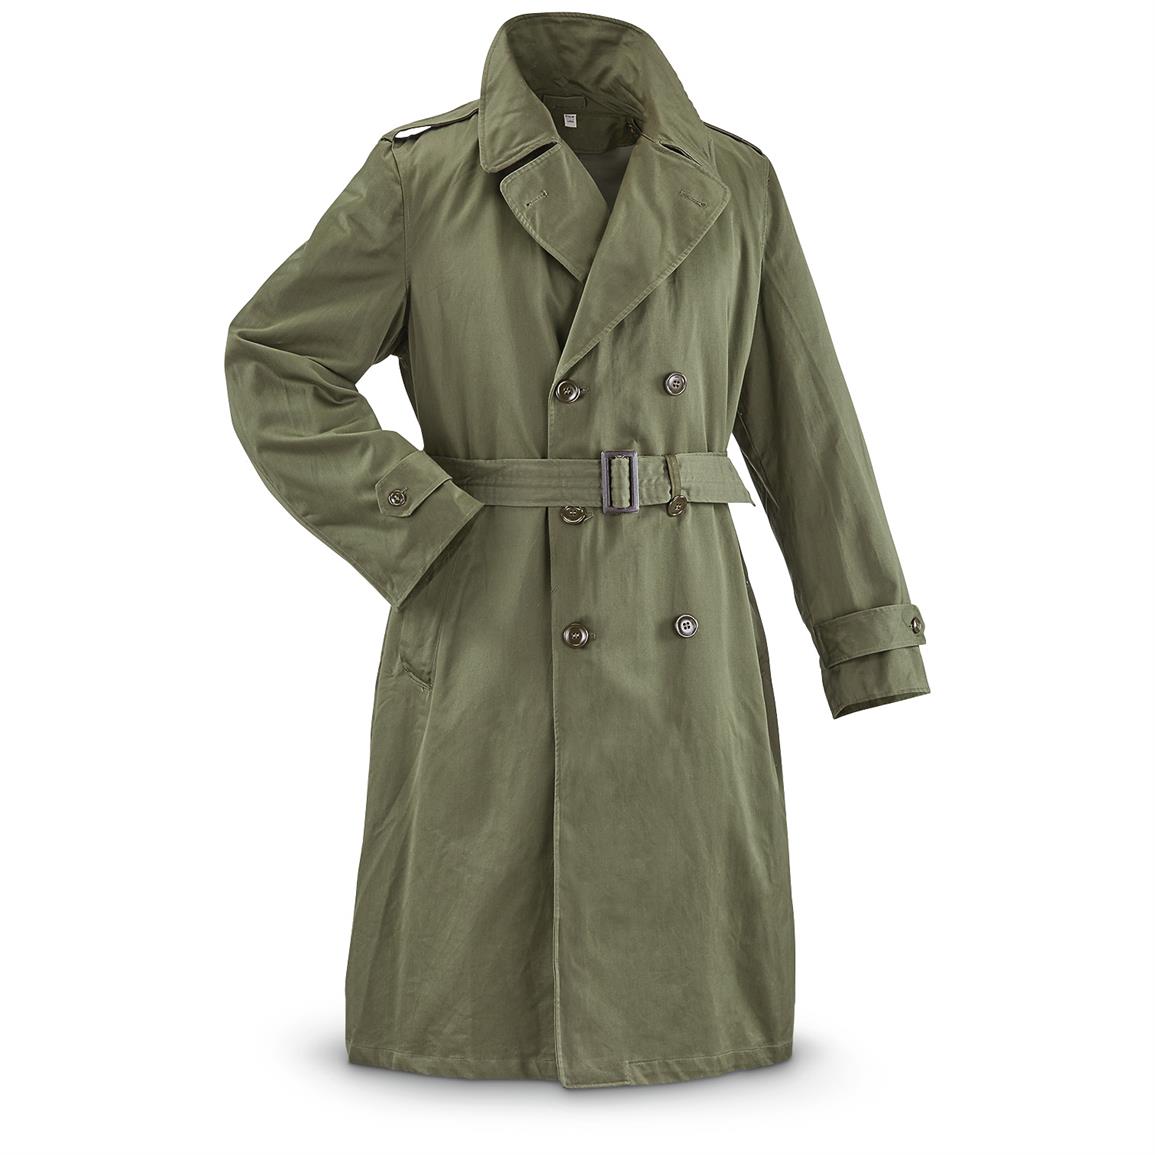 Army Surplus Trench Coat - Army Military